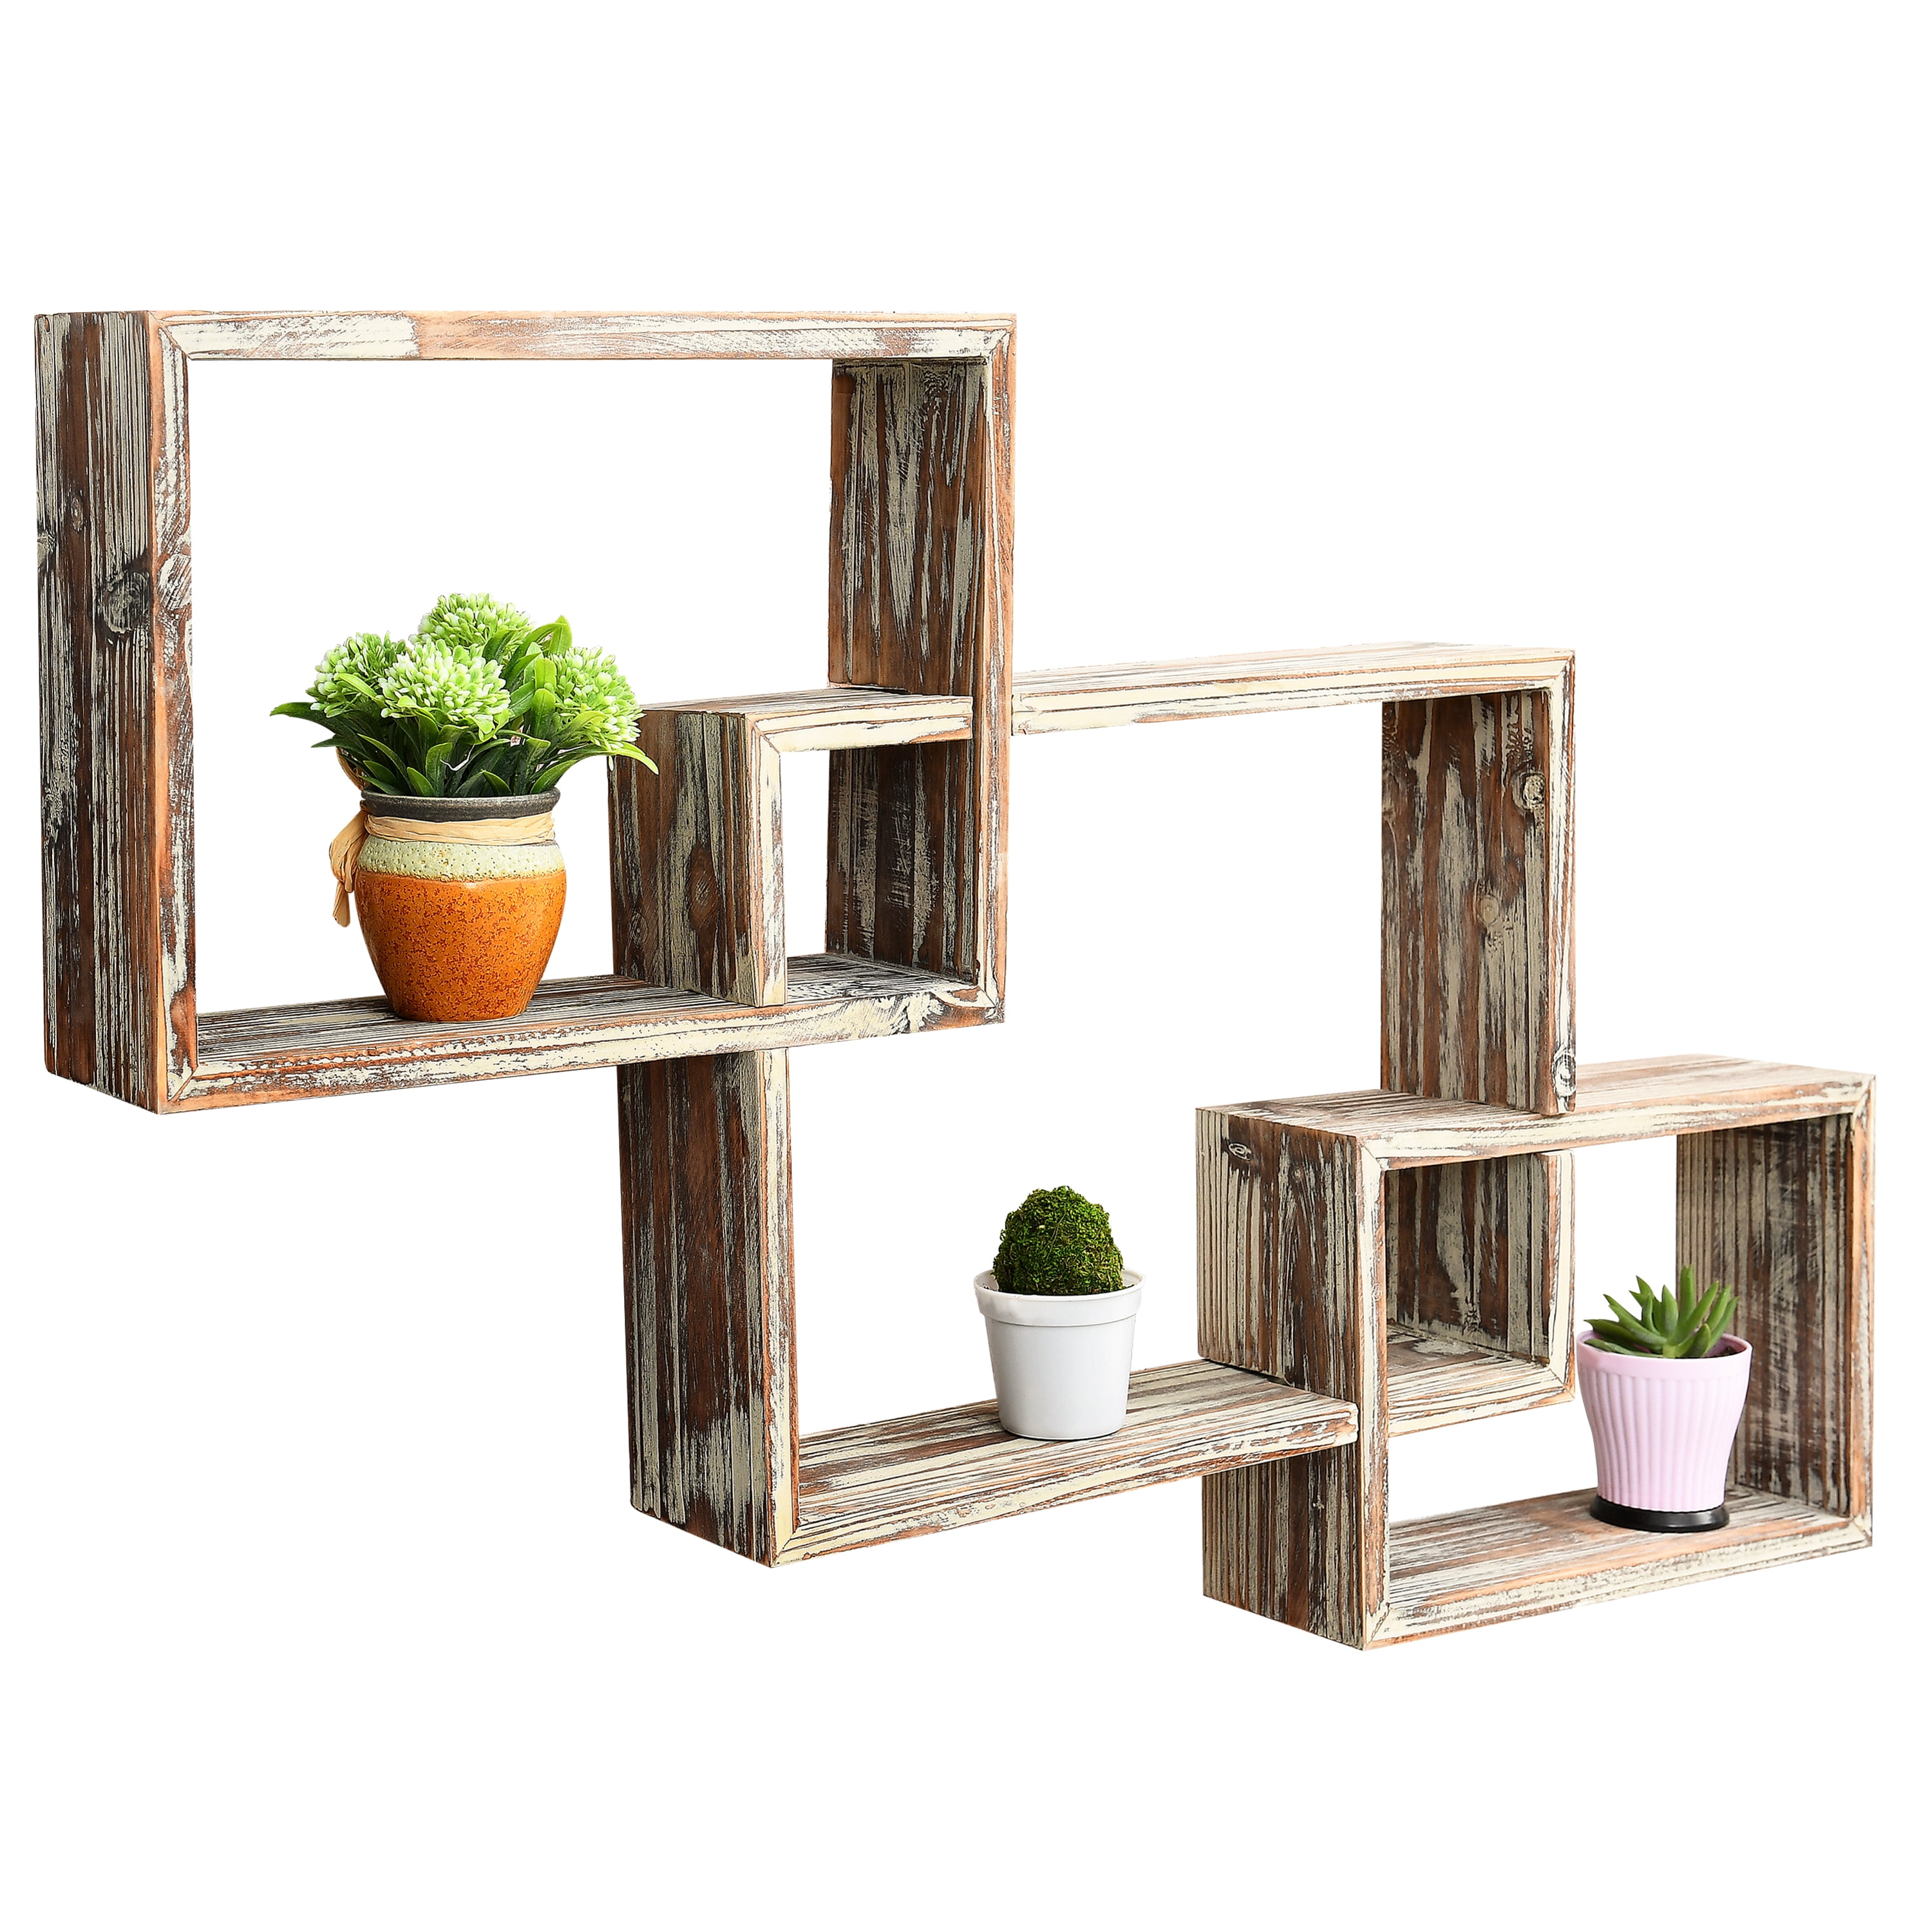 Set of 3 Cube Floating Shelves with Retro Design Wall Mounted Display Shelf Brown